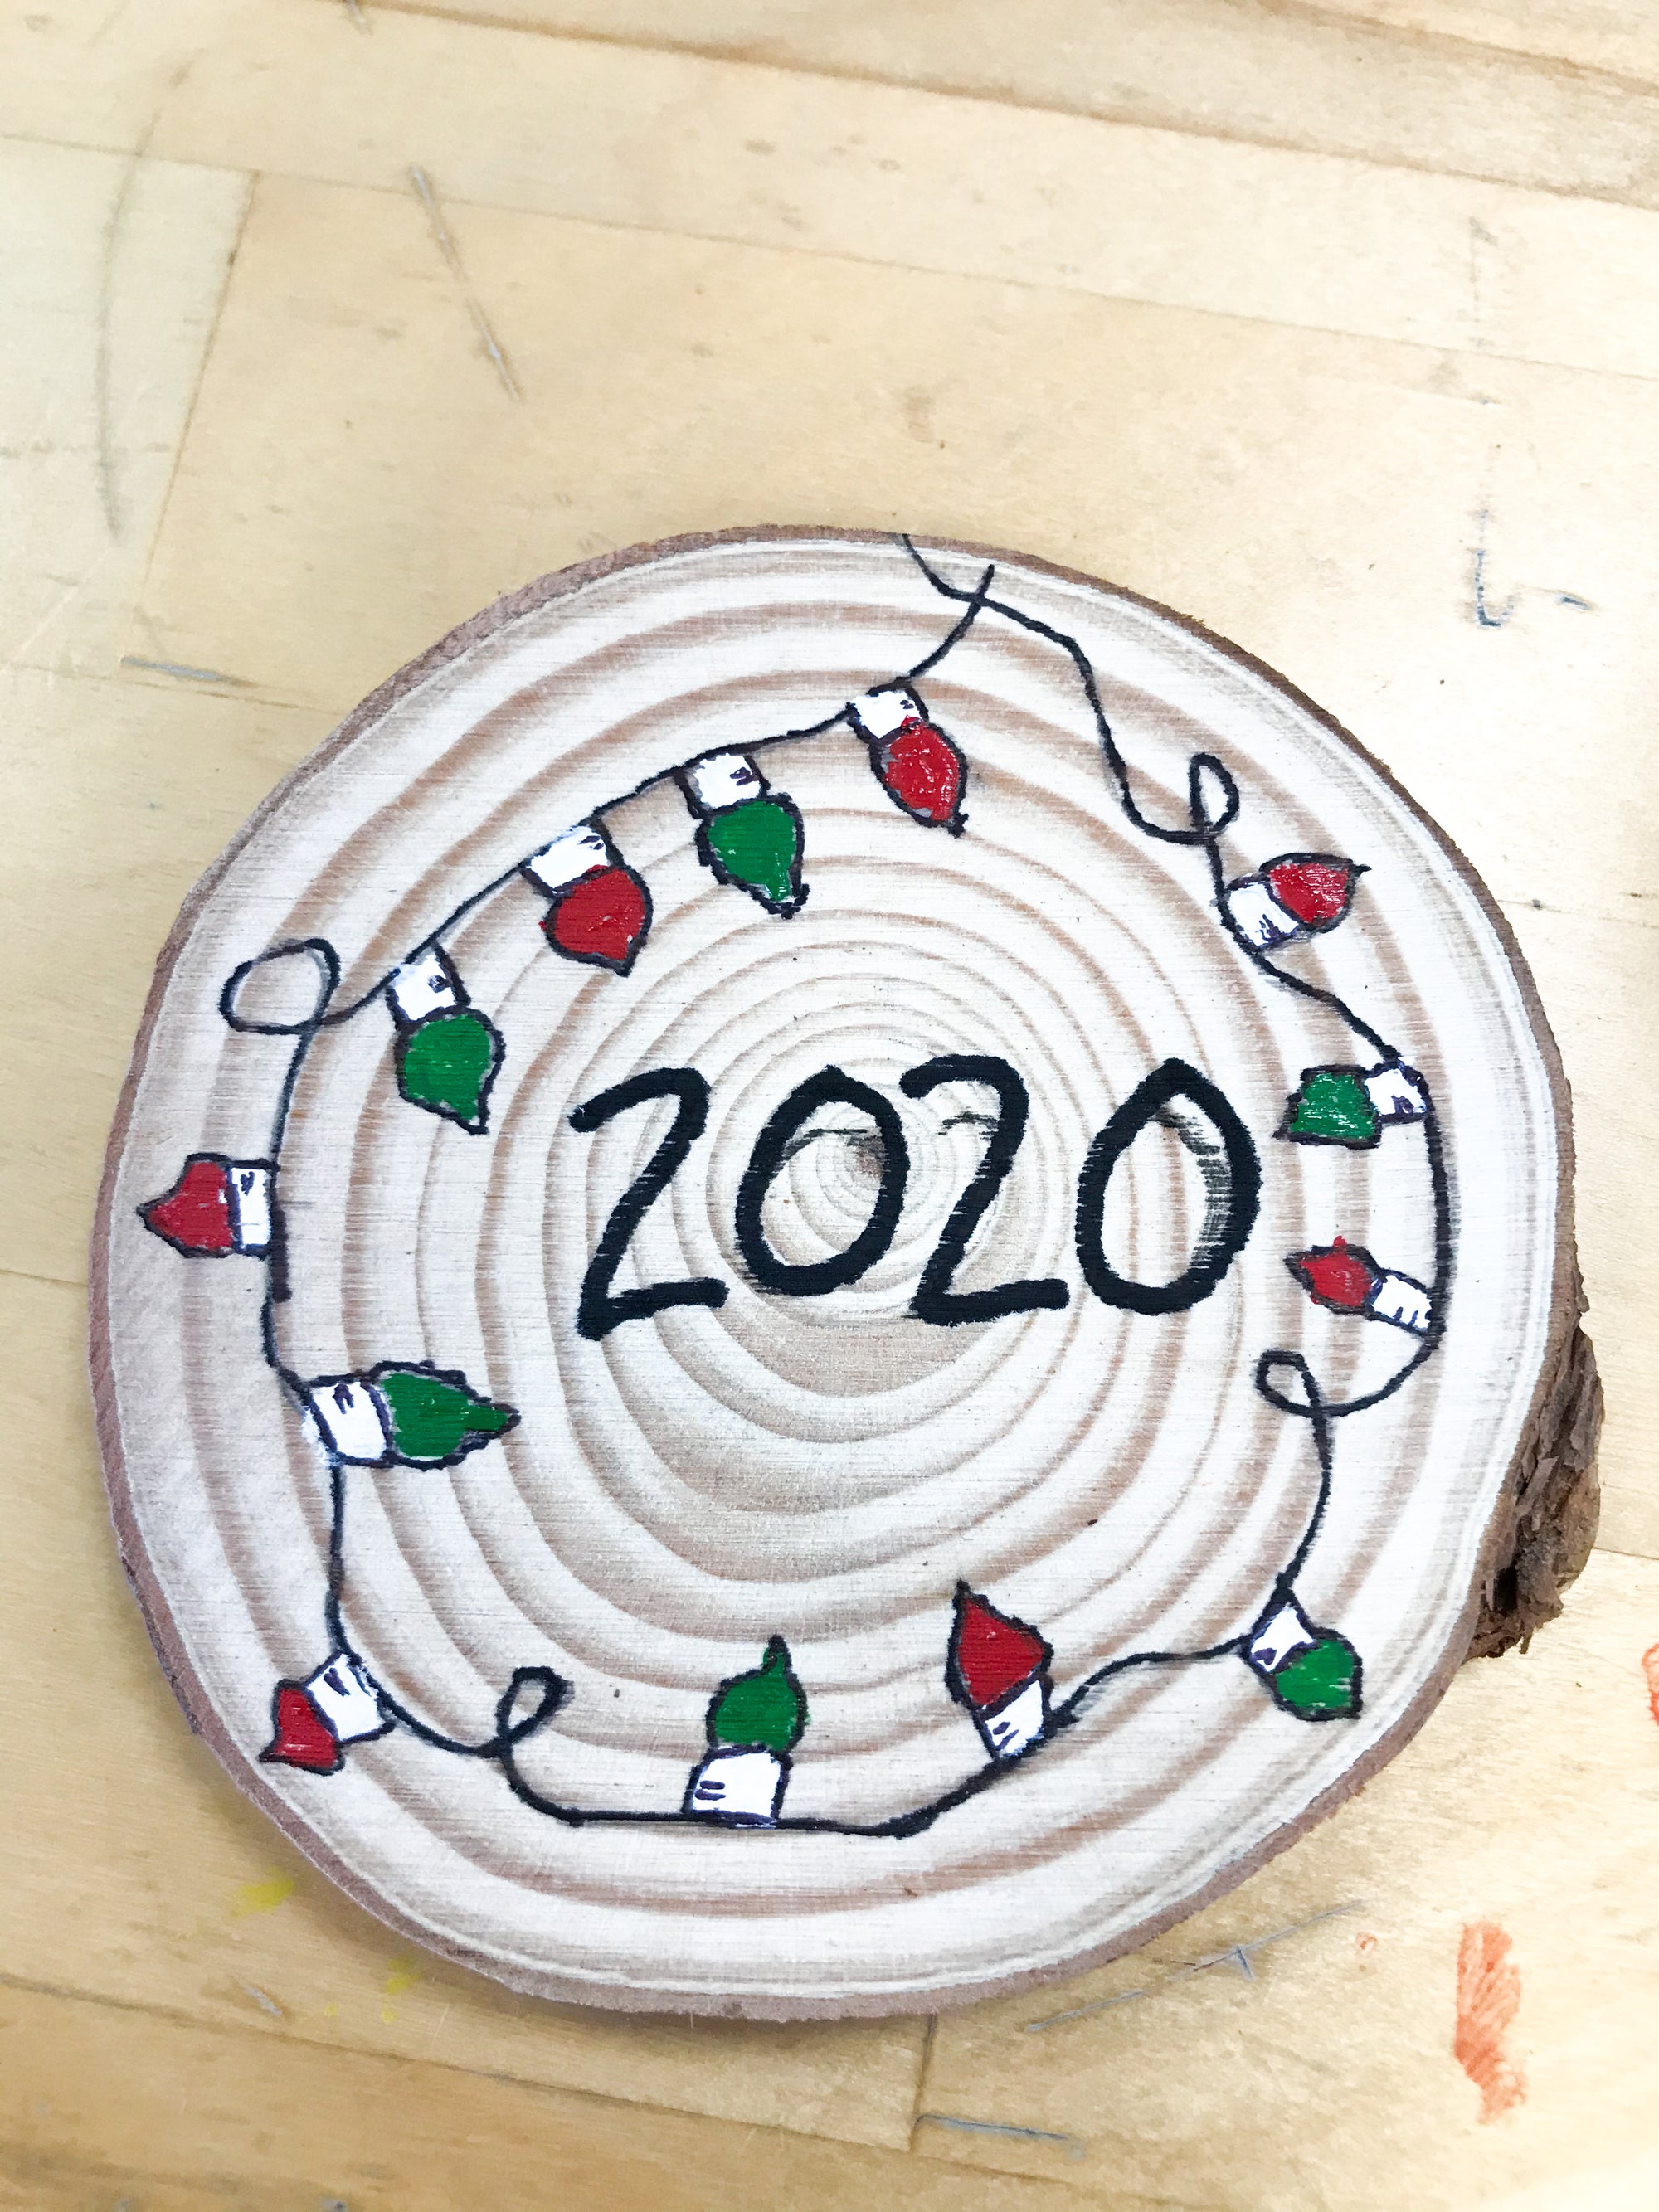 Art Kit: Wooden ornaments/coasters (shipping) - Akron ArtWorks